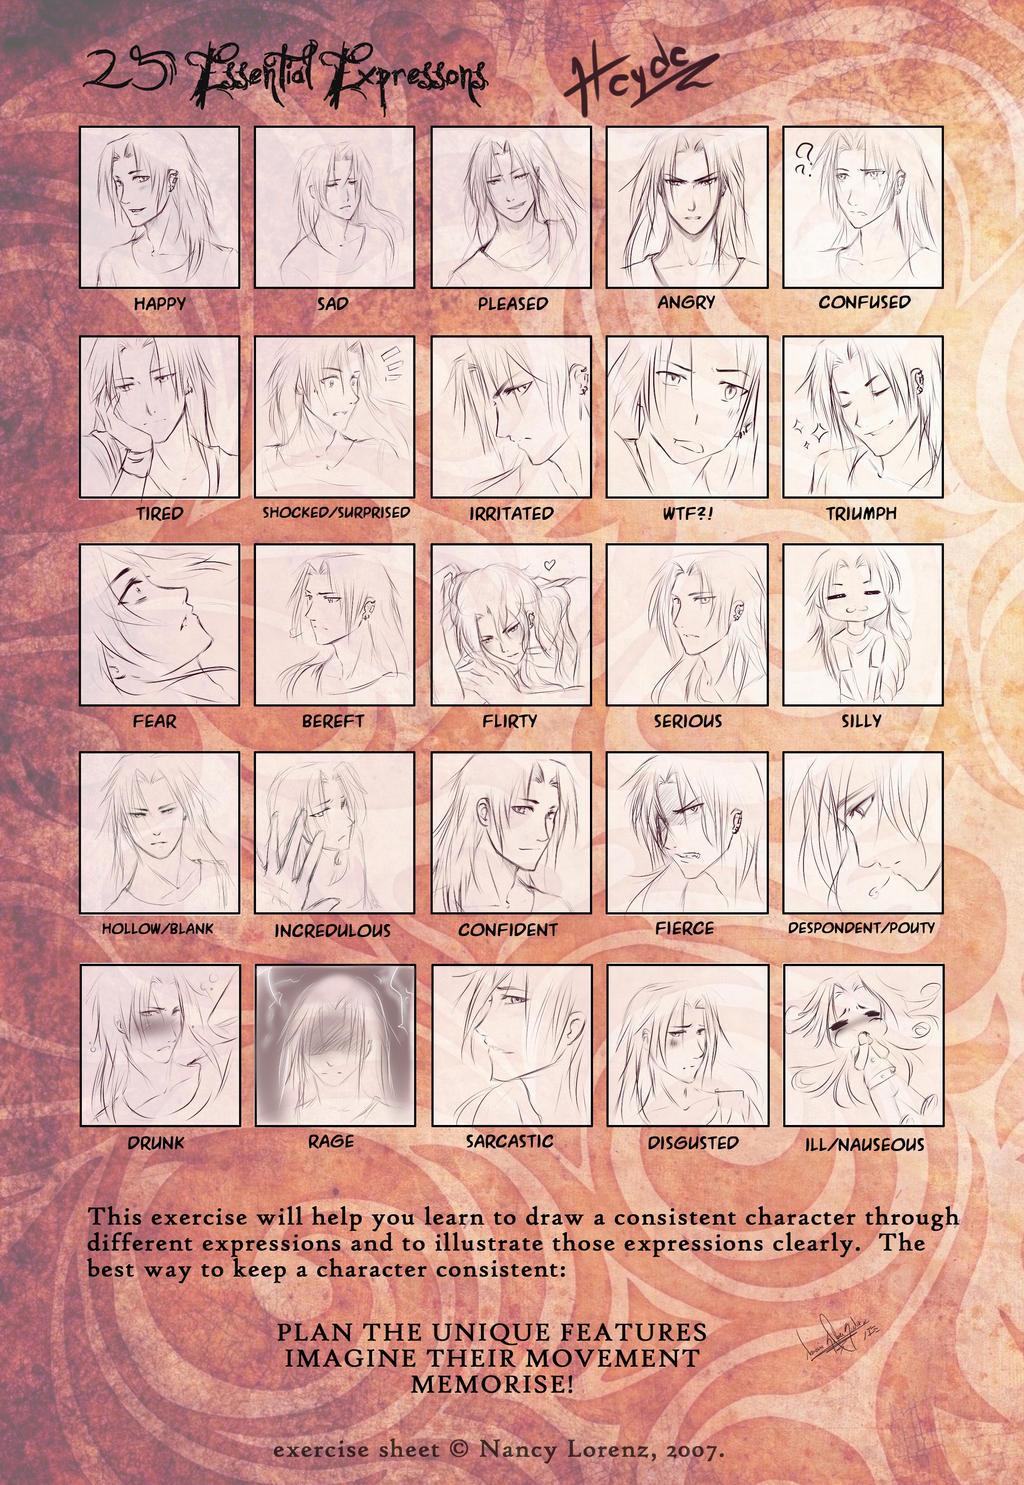 25 essential expressions Heyde!! OwO